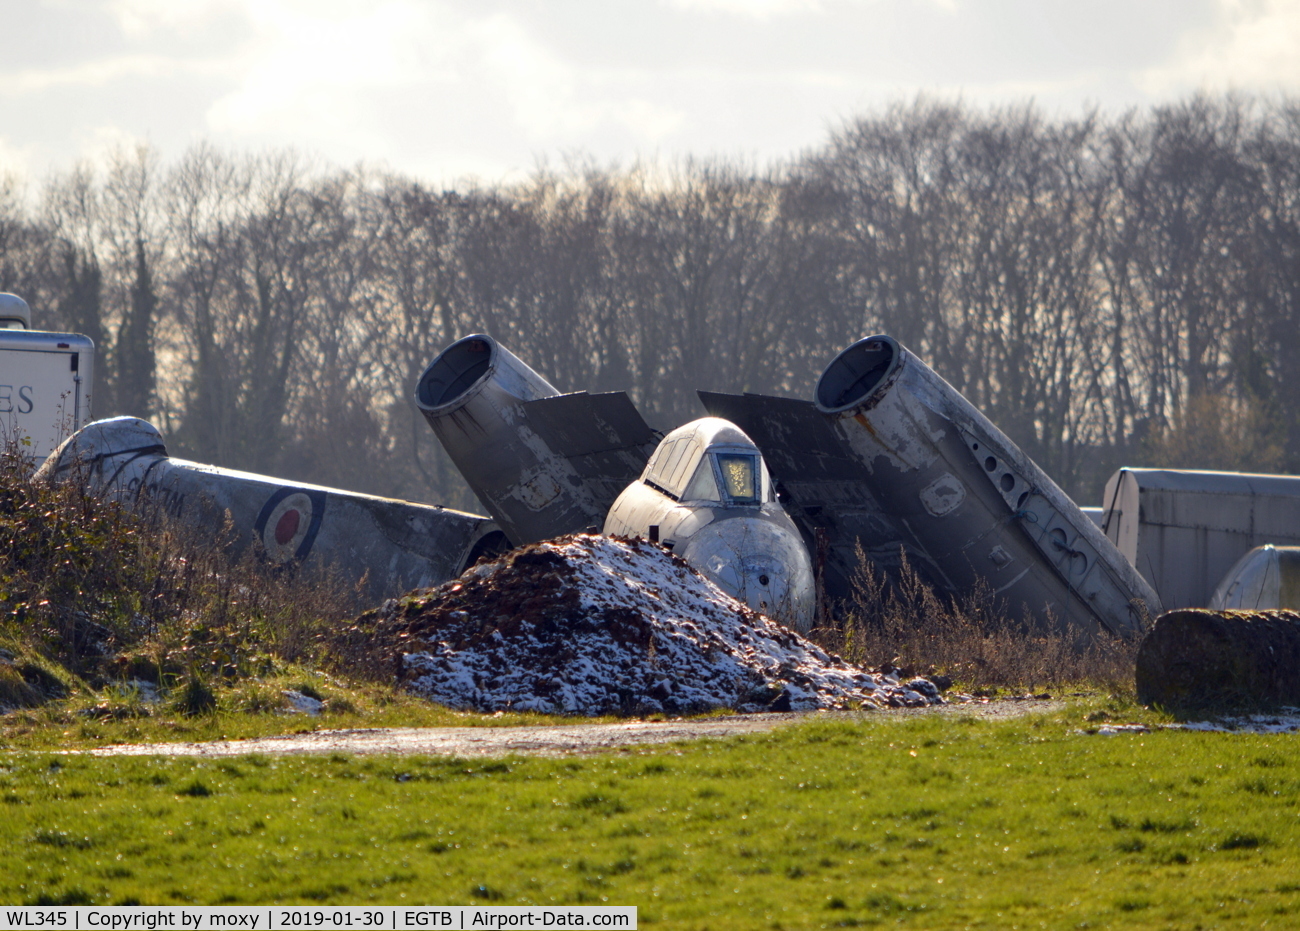 WL345, Gloster Meteor T.7 C/N Not found WL345, Dismantled Gloster Meteor T.7 ex Parkhouse Aviation now dumped near the glider trailers at Wycombe Air Park. Very sad.